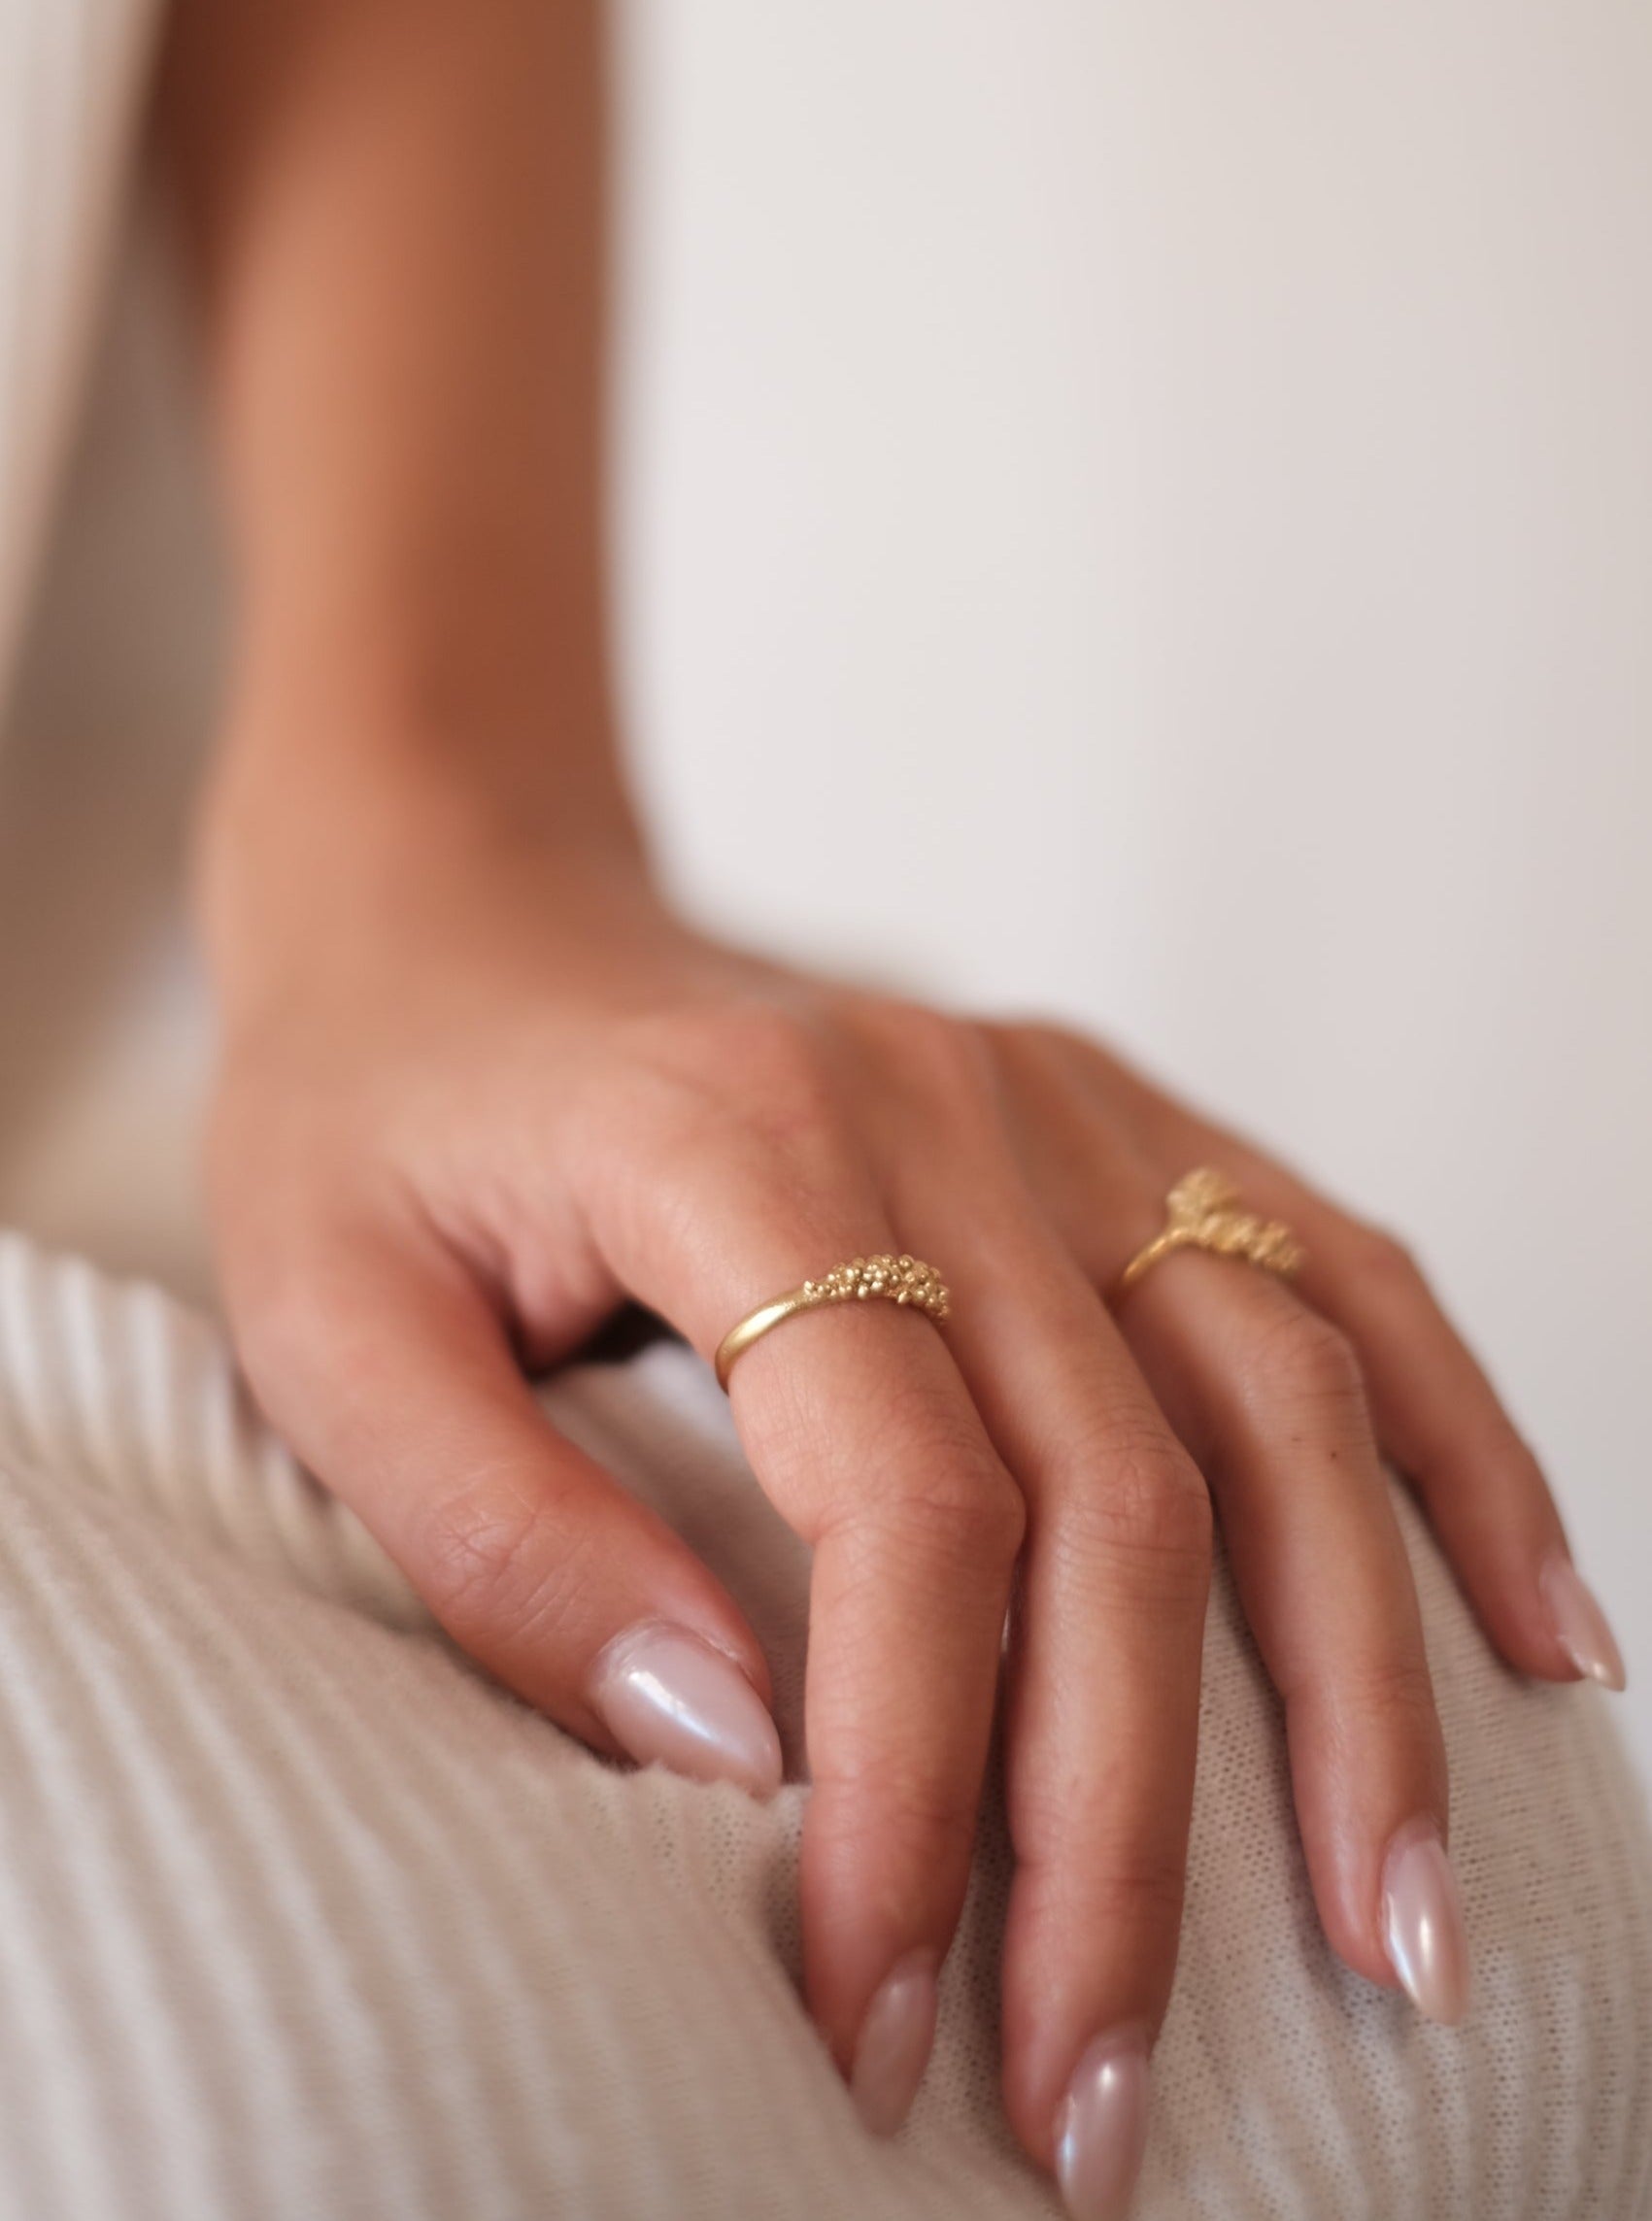 Experience timeless elegance with a woman's hand adorned by the Cremilde Bispo Jewellery Essential Dot Ring GP, capturing an exquisite and sophisticated look.